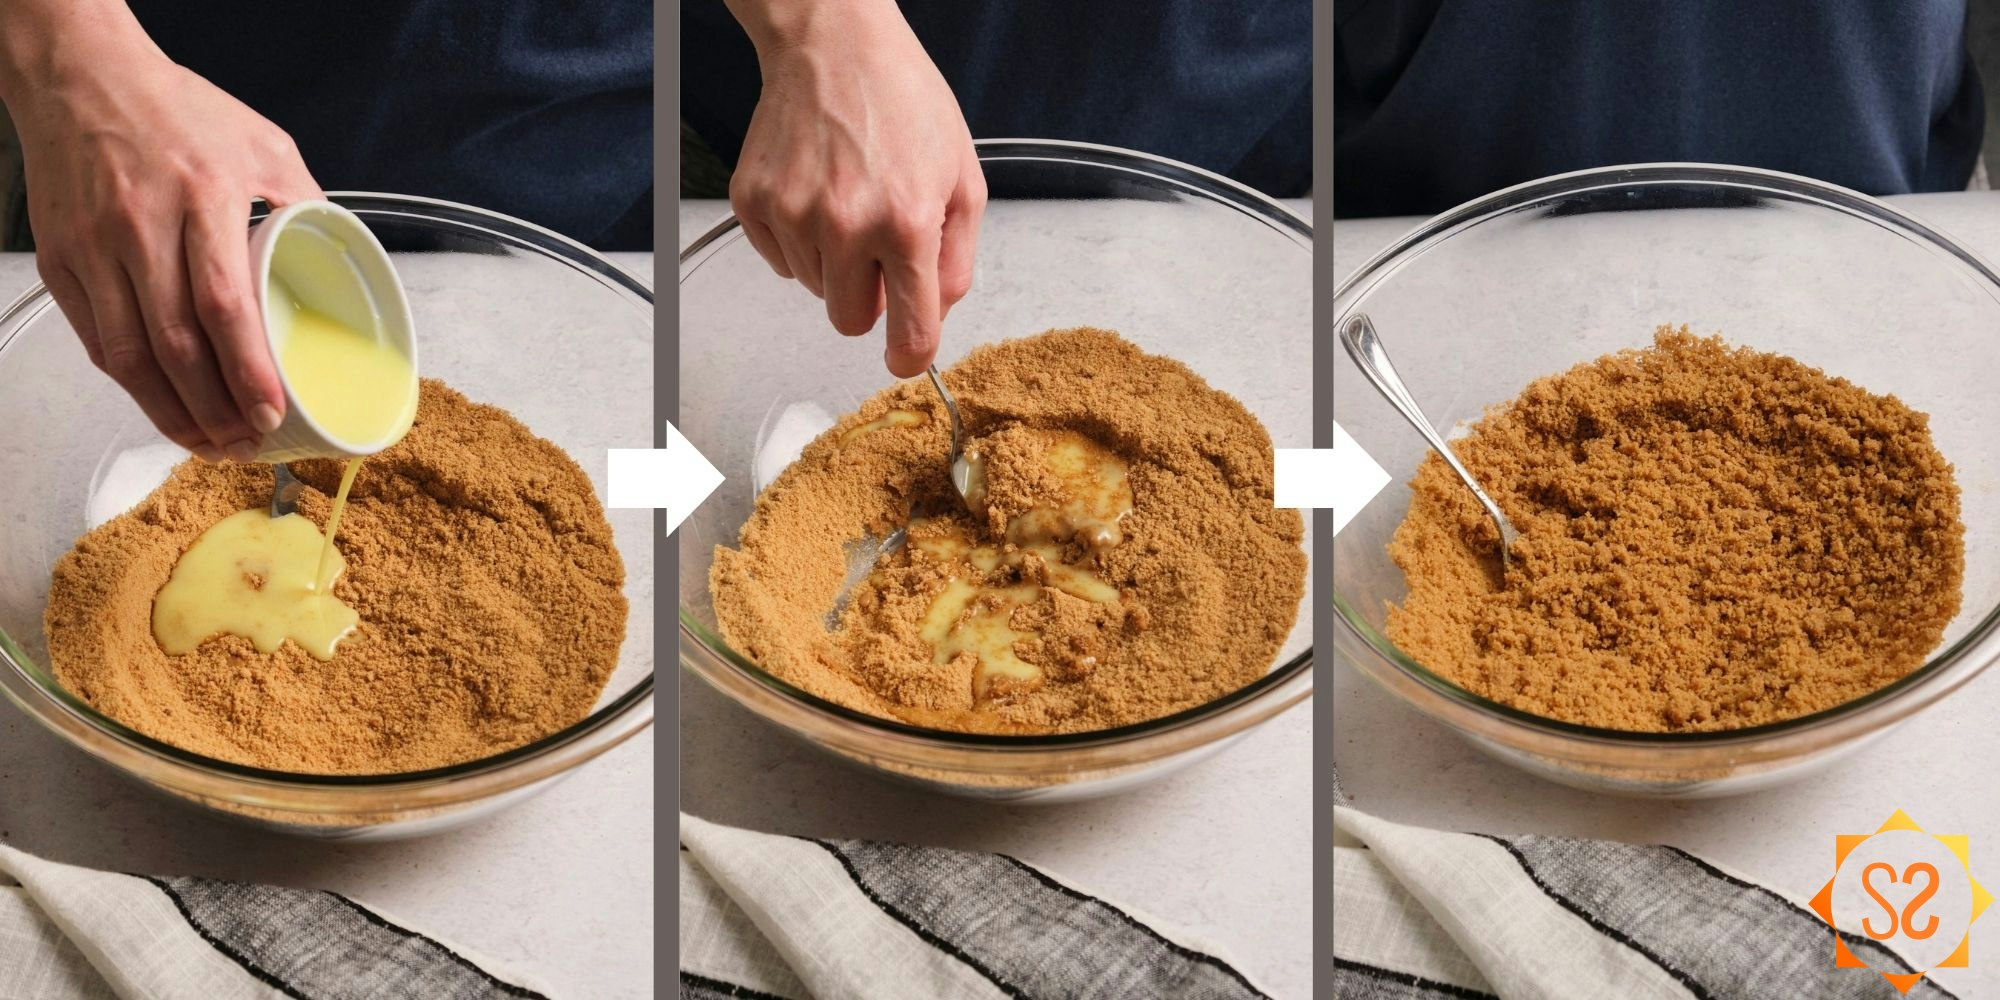 Three images showing the process of pouring and mixing vegan butter into the graham cracker crumb mix.